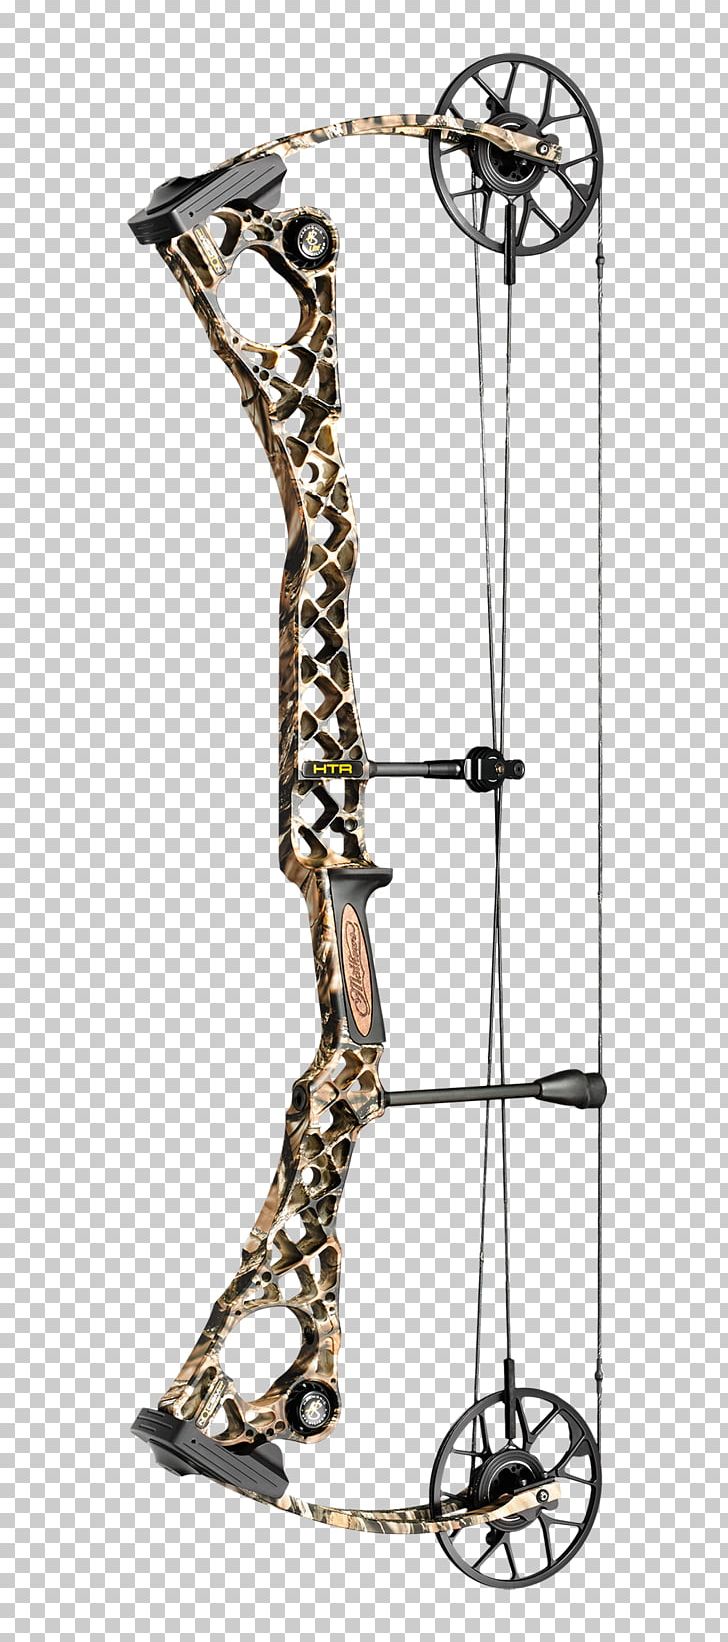 Bow And Arrow Cam Compound Bows Bowhunting PNG, Clipart, Archery, Arrow, Binary Cam, Bit, Bow And Arrow Free PNG Download